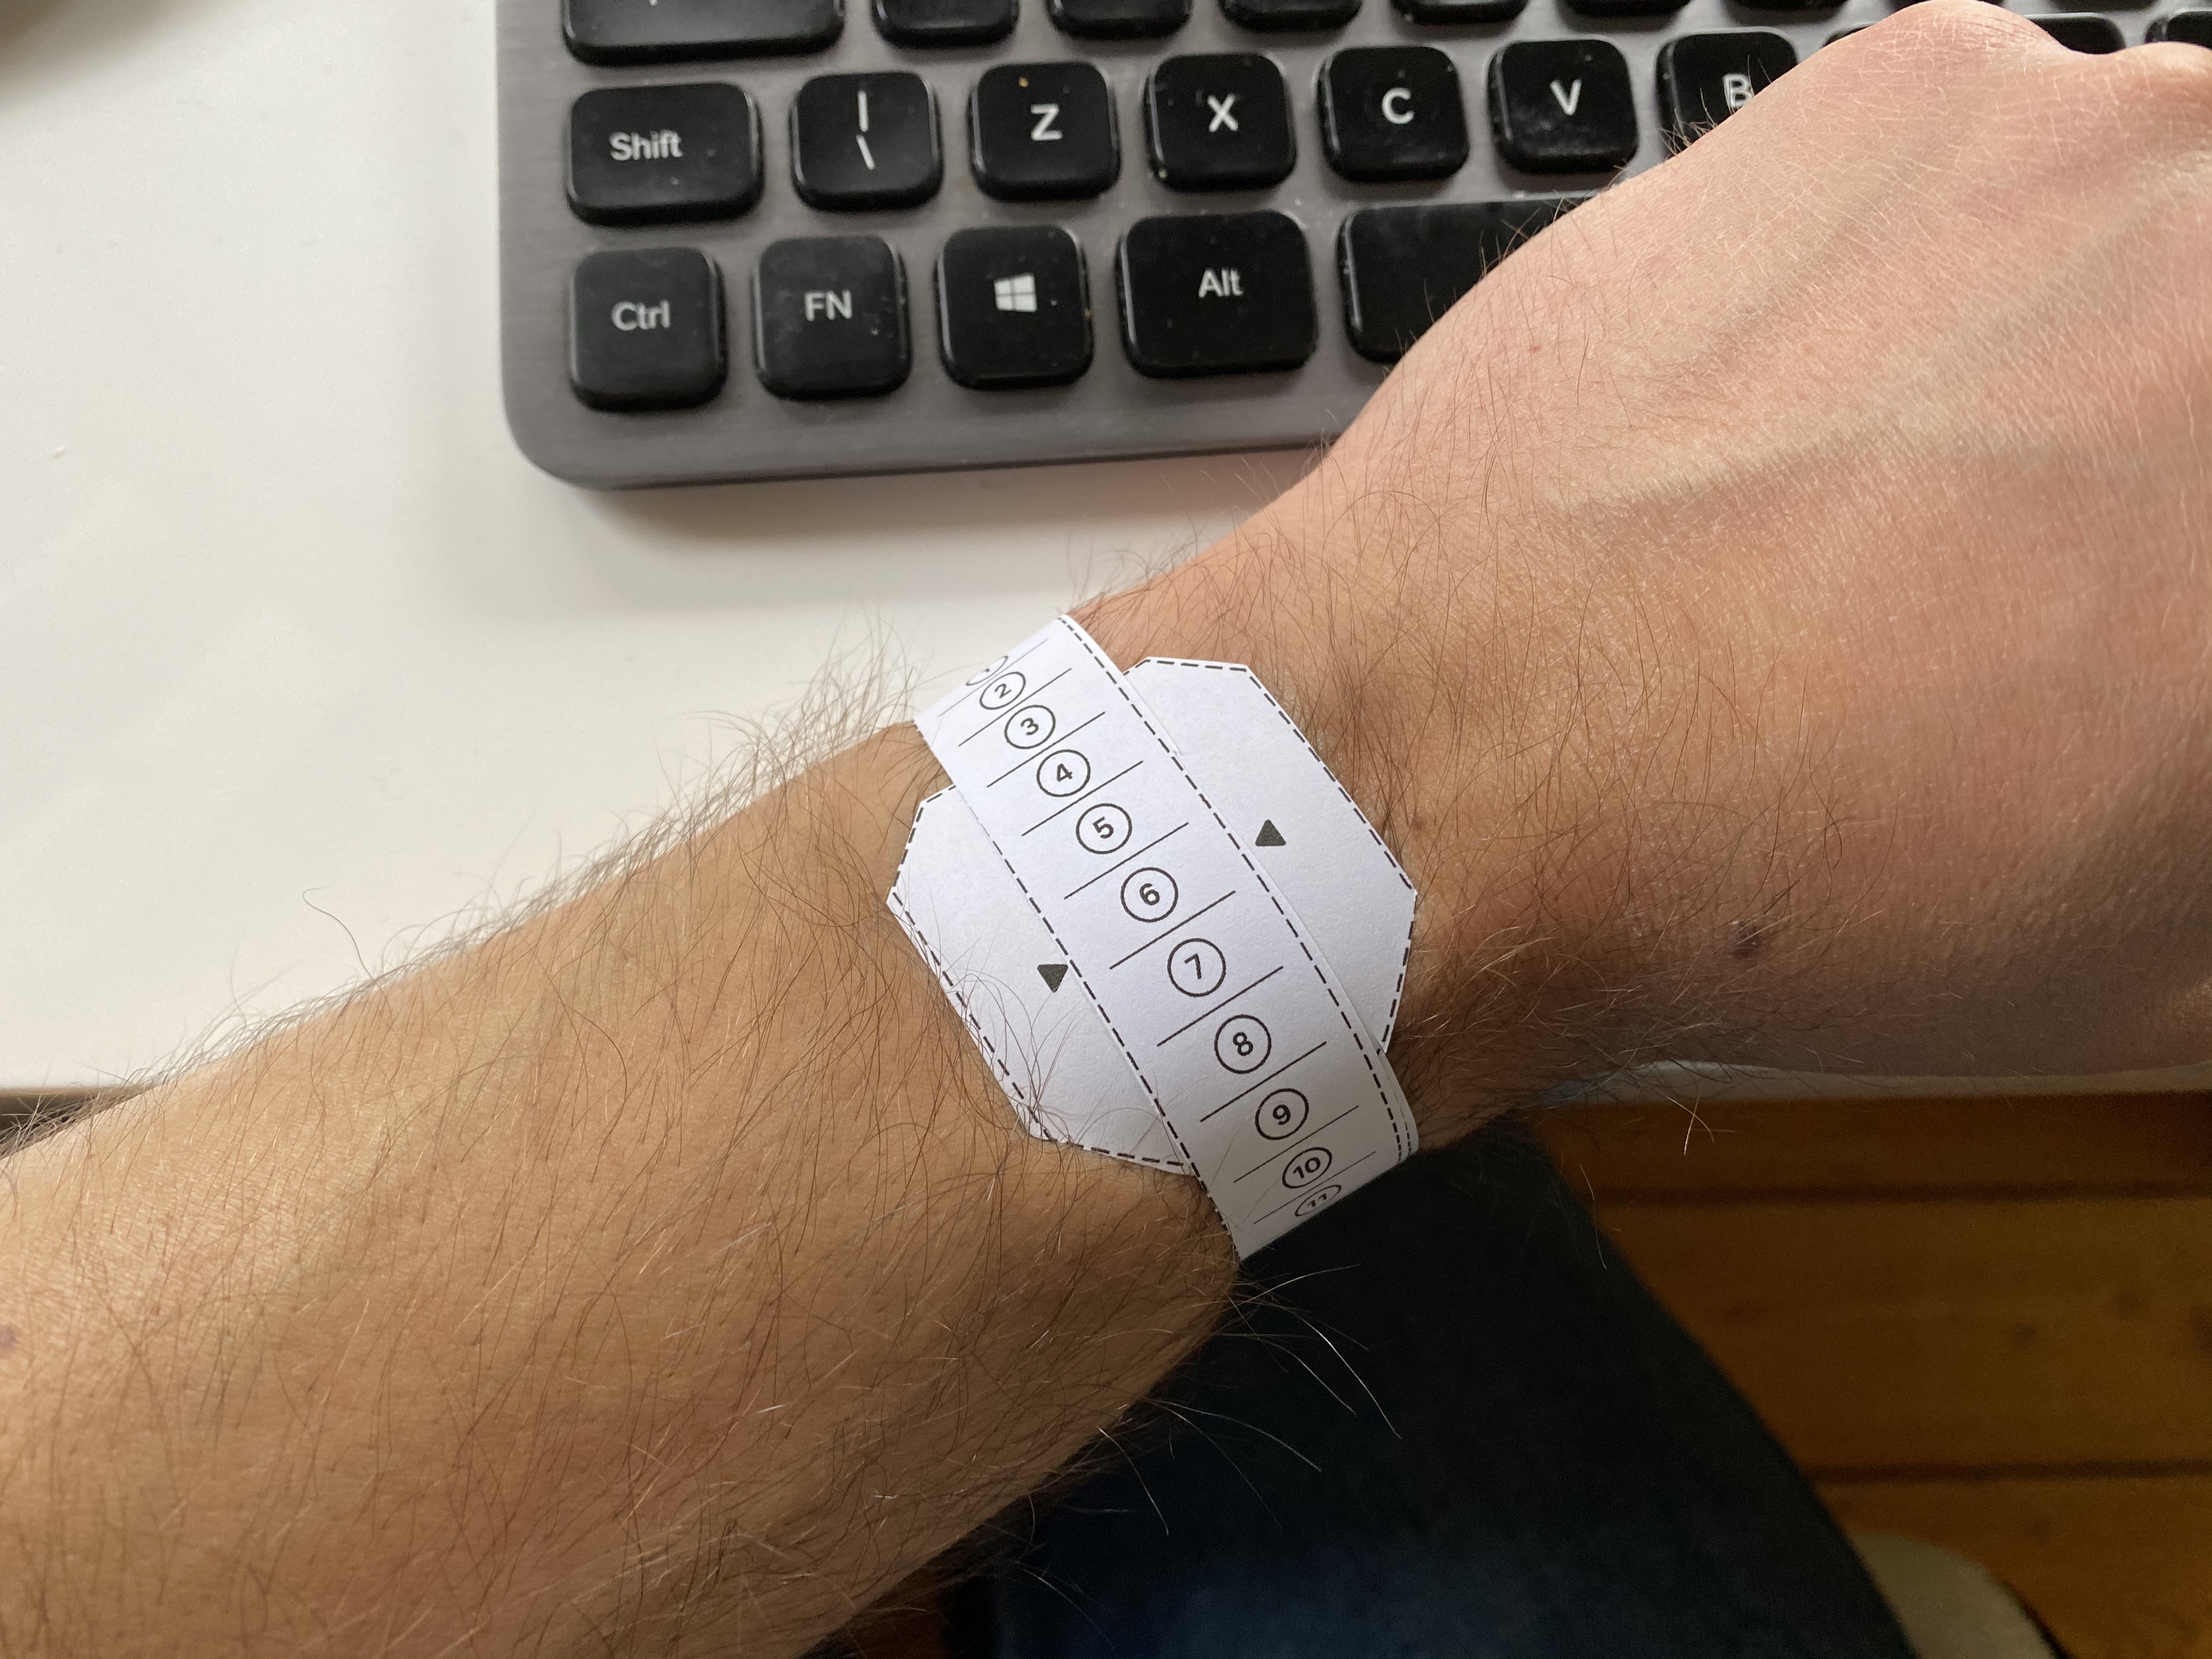 How To Correctly Measure Your Wrist For Apple Watch Solo Loop Bands Macrumors